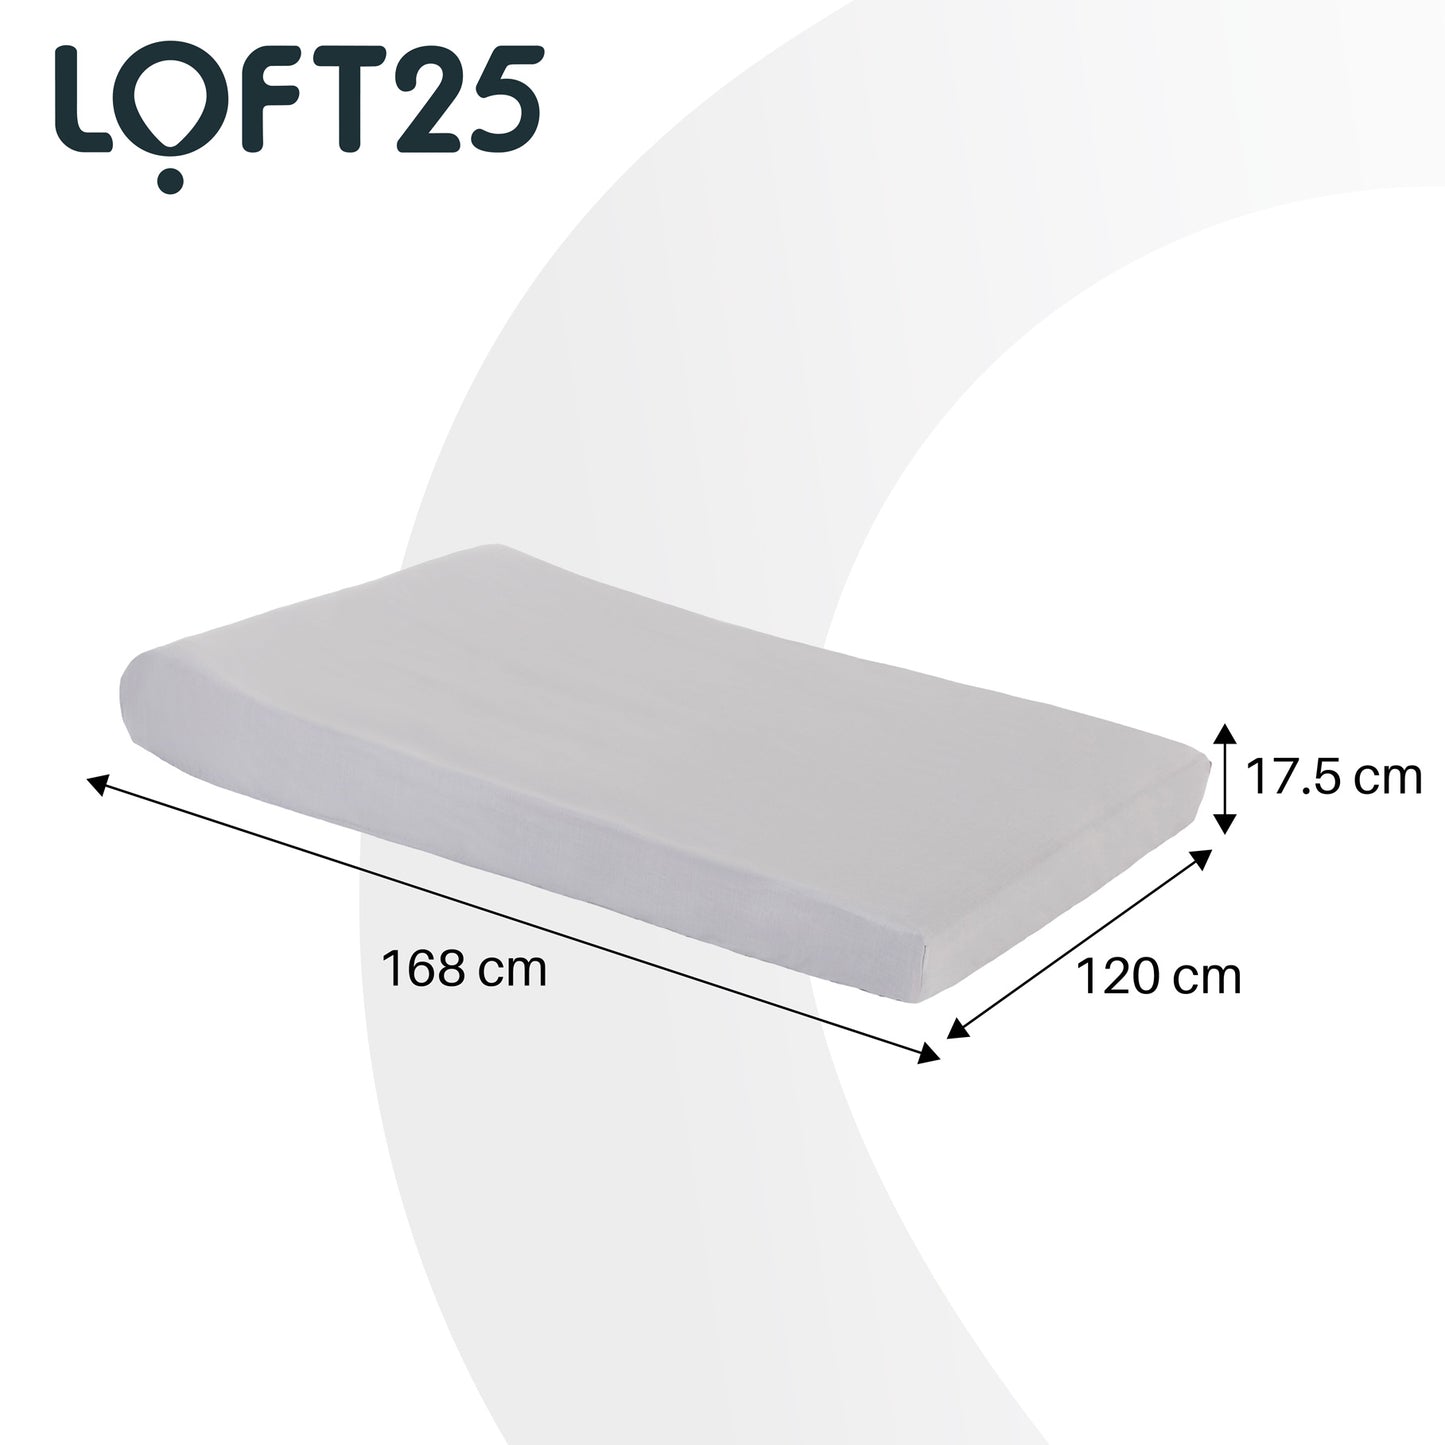 Loft 25 Fold Out Z Bed Chair Fitted Sheet